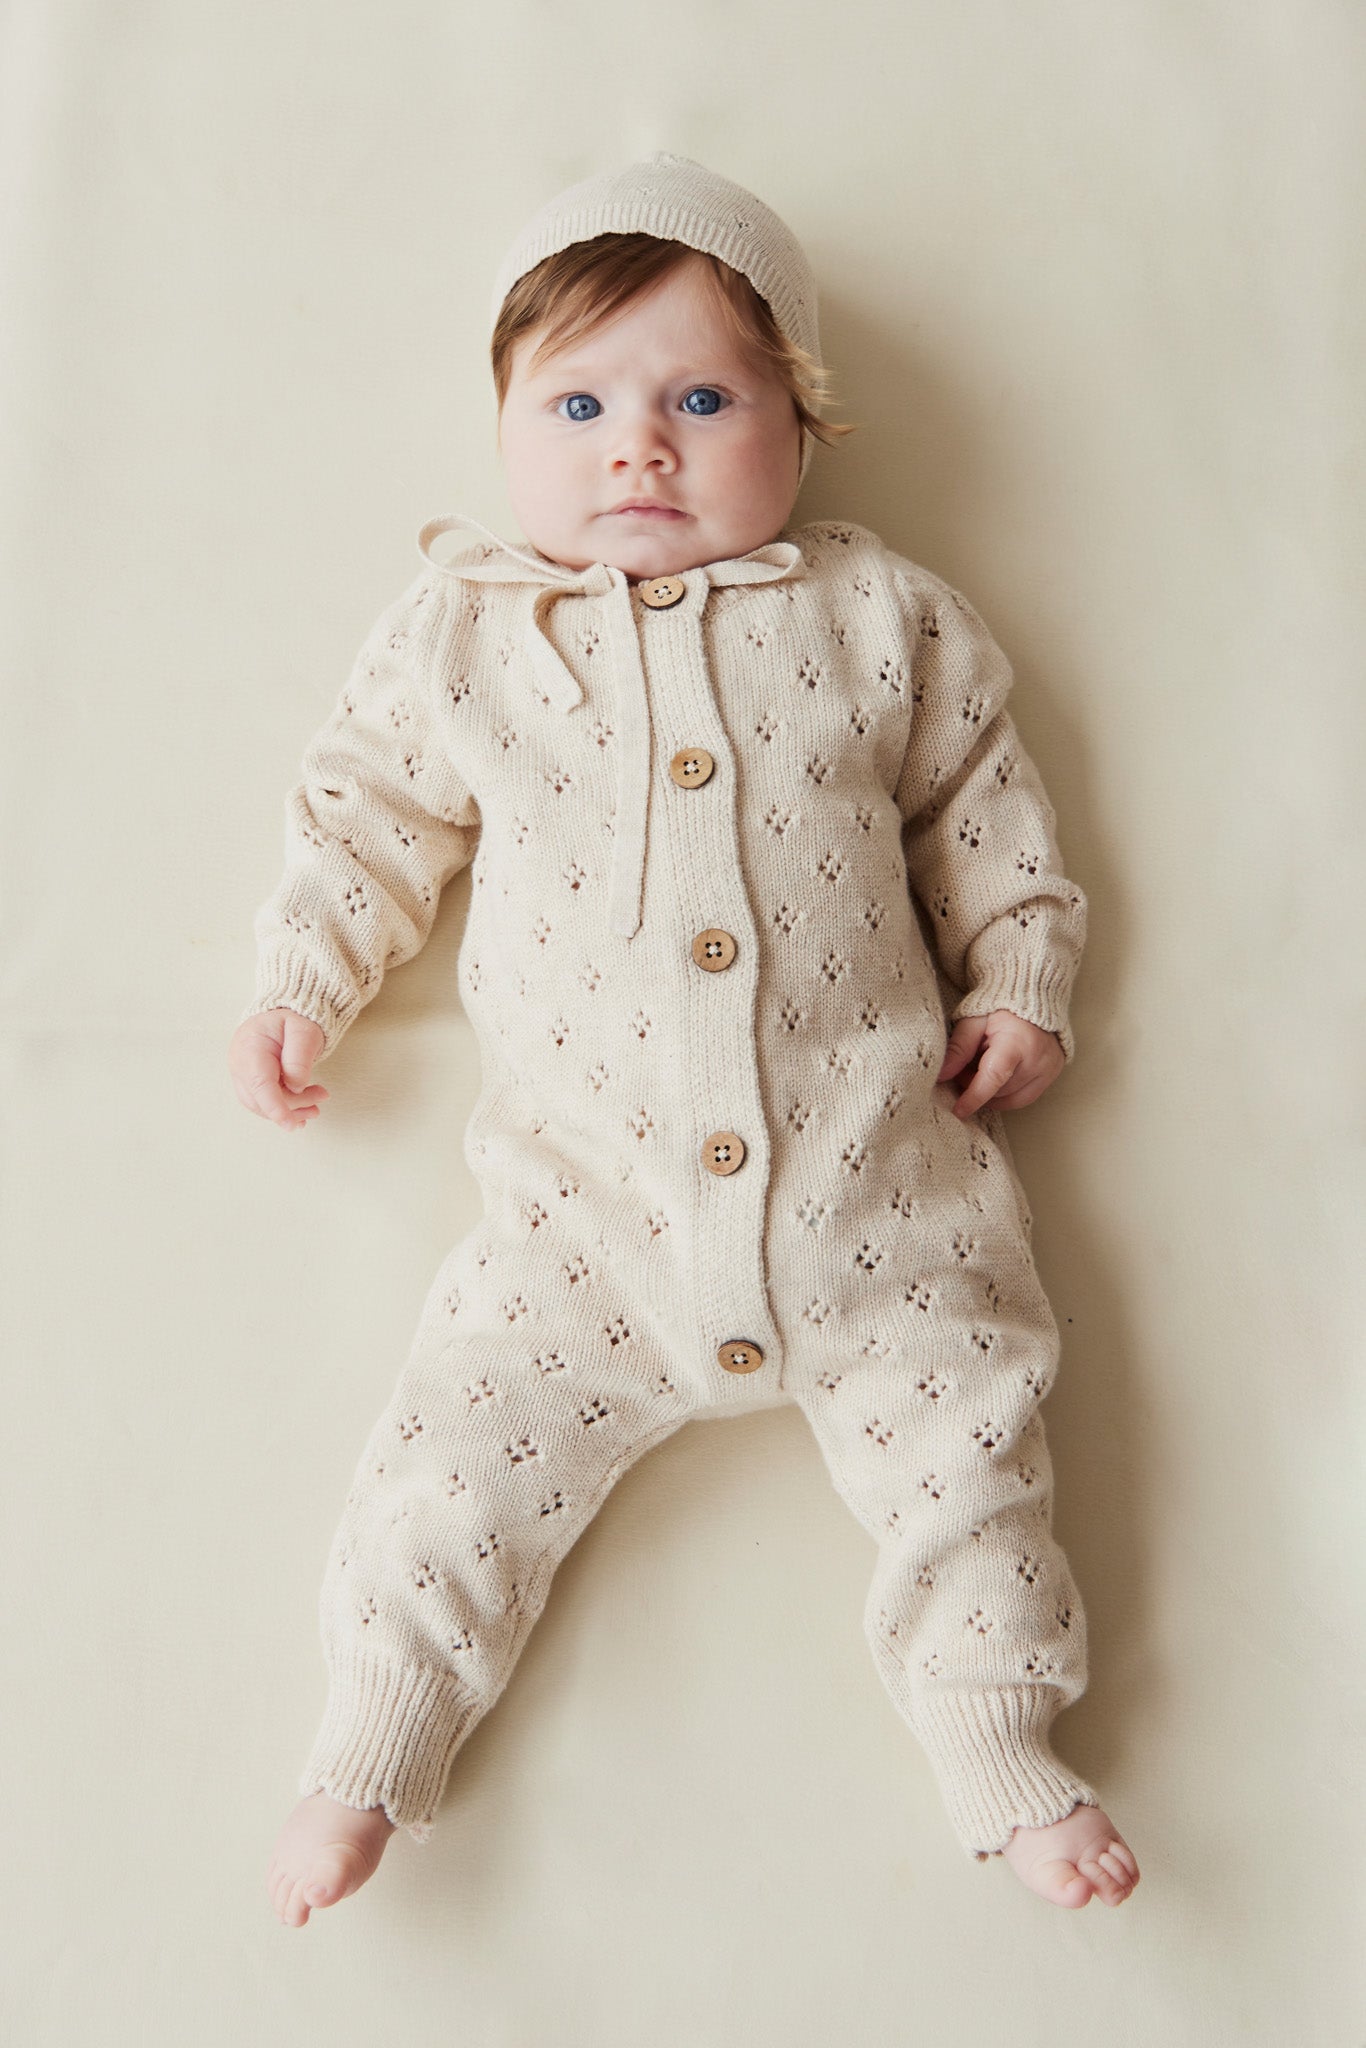 Emily Knitted Onepiece | Light Oatmeal Marle